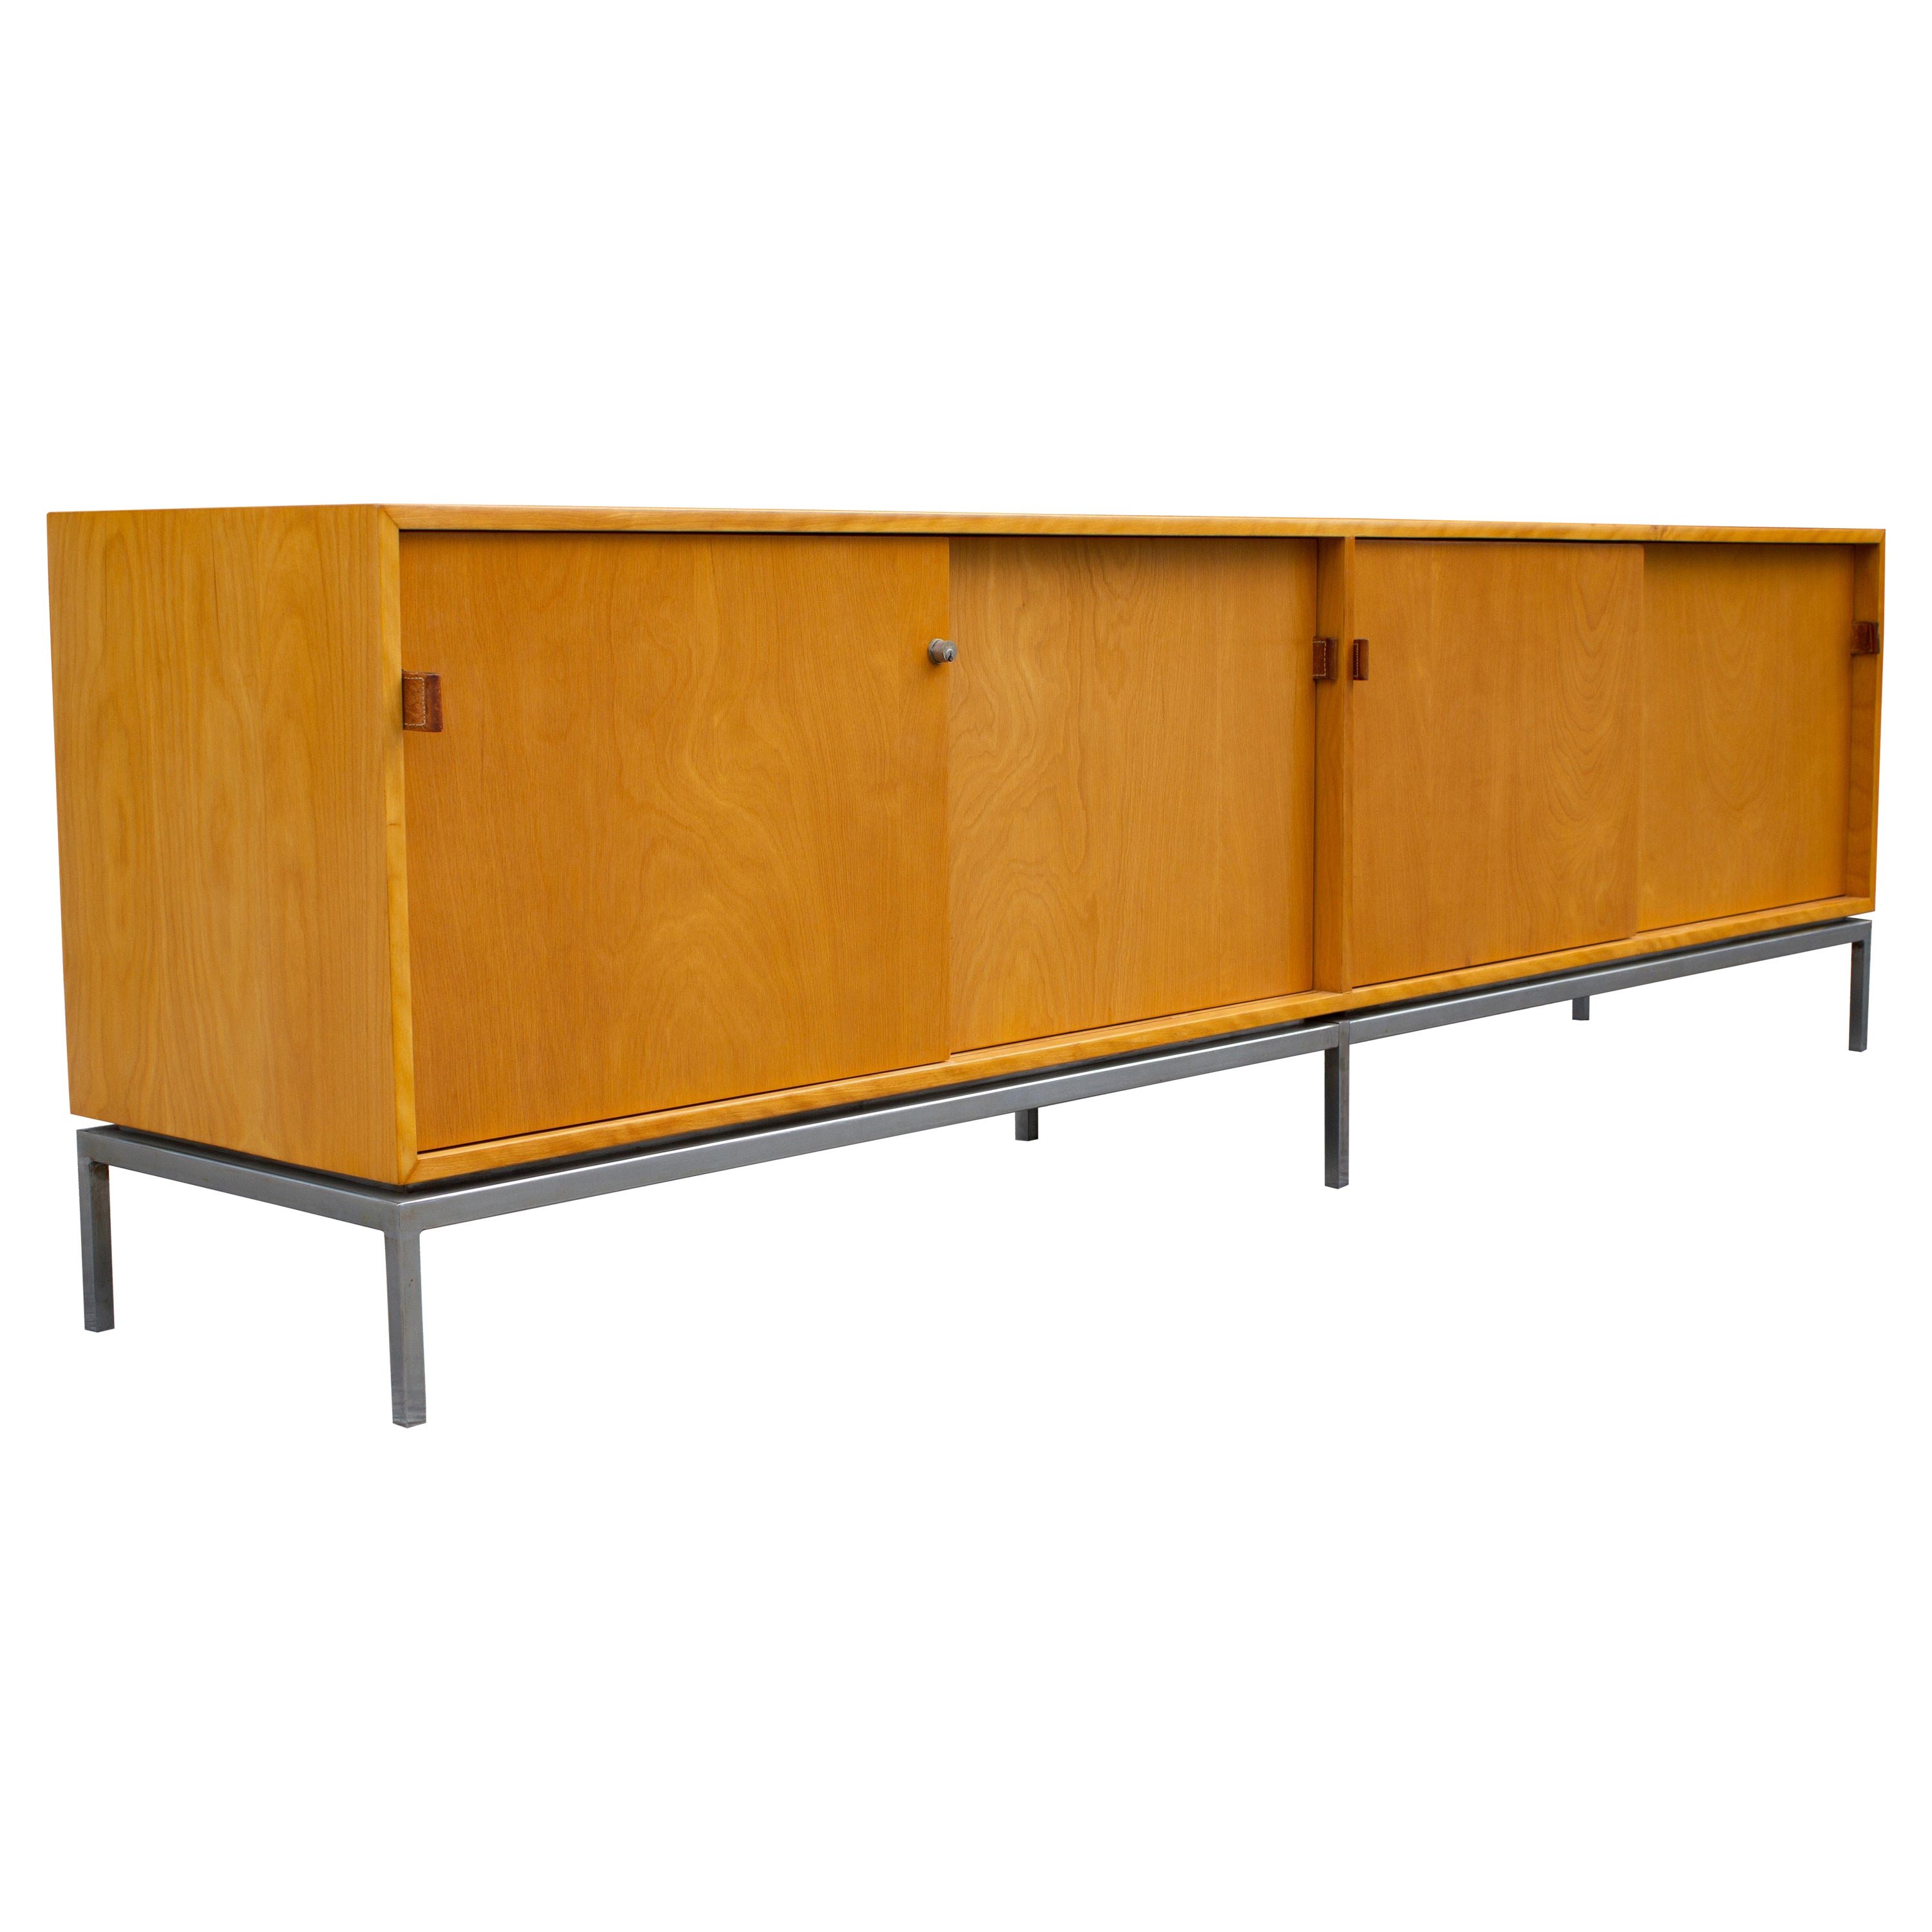 Florence Knoll Maple Credenza with Leather Pulls and Oak Drawers Early 1950s For Sale